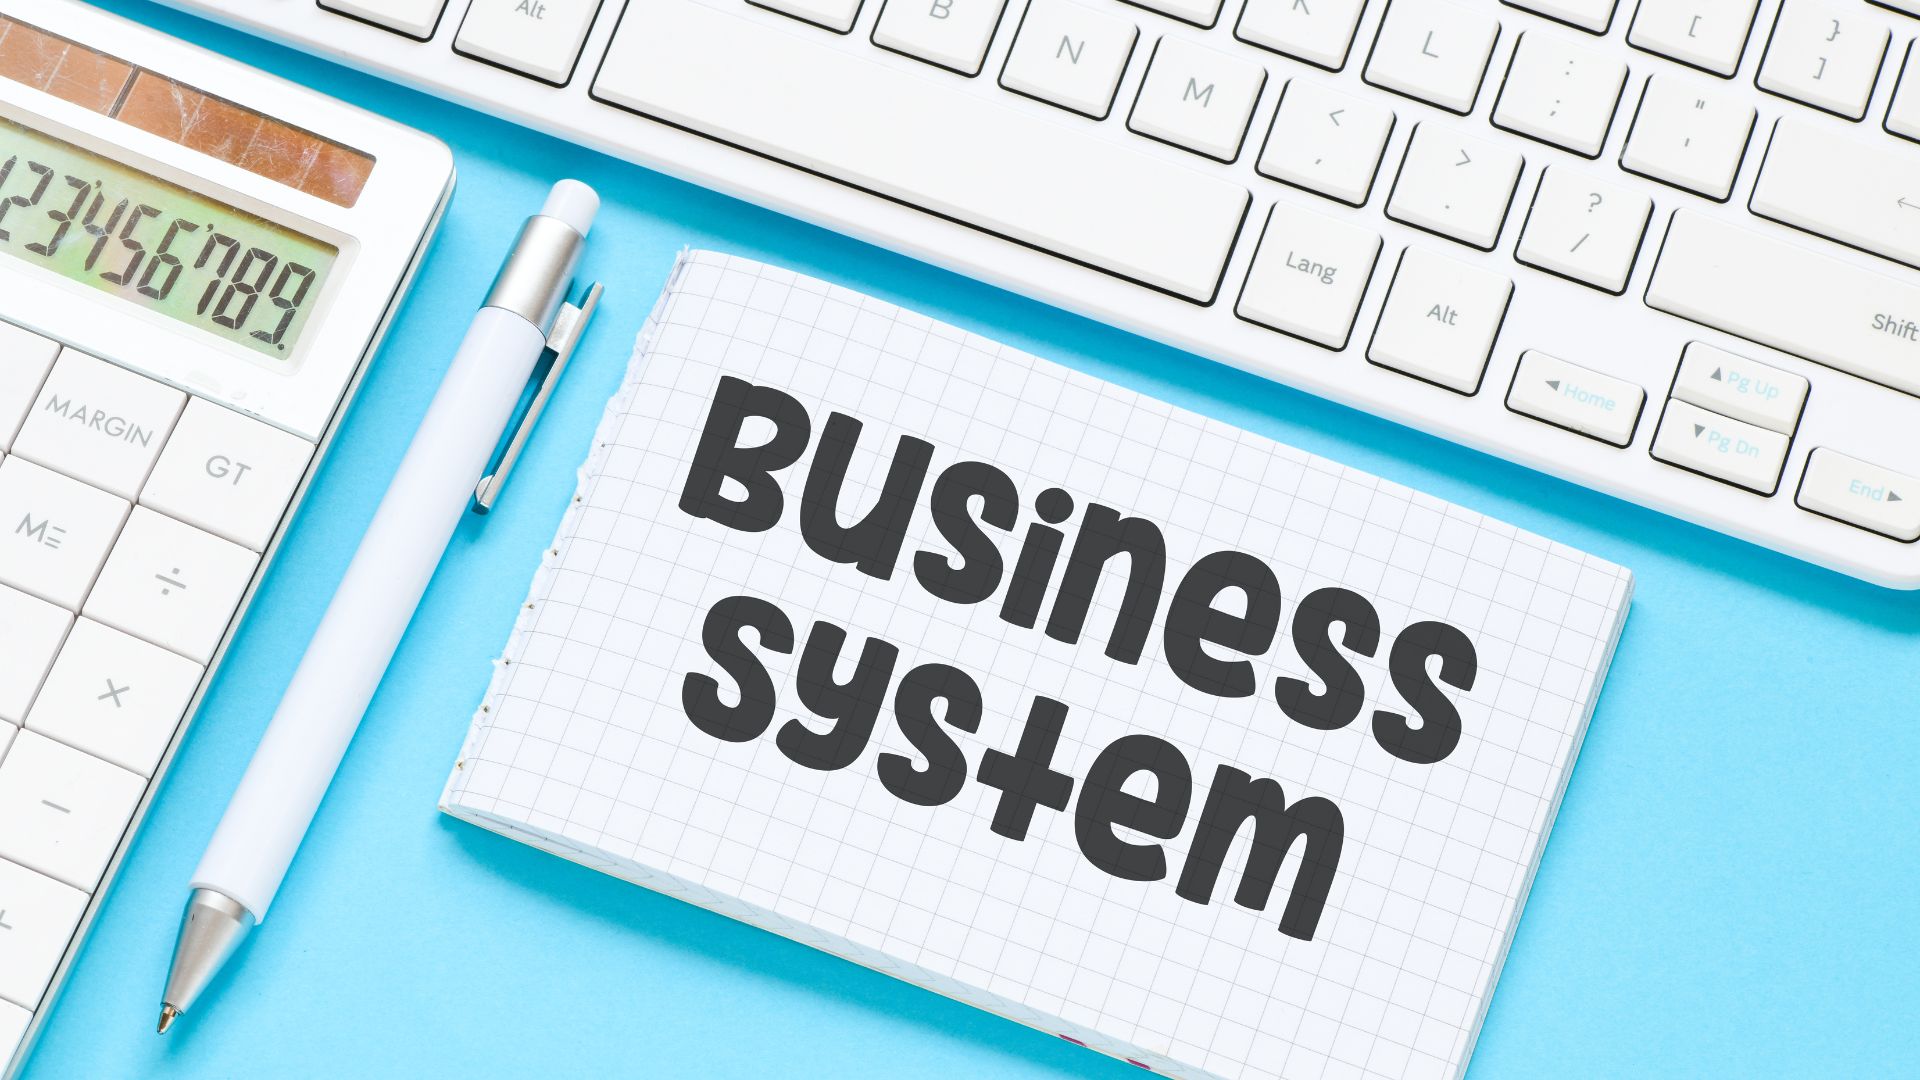 business systems